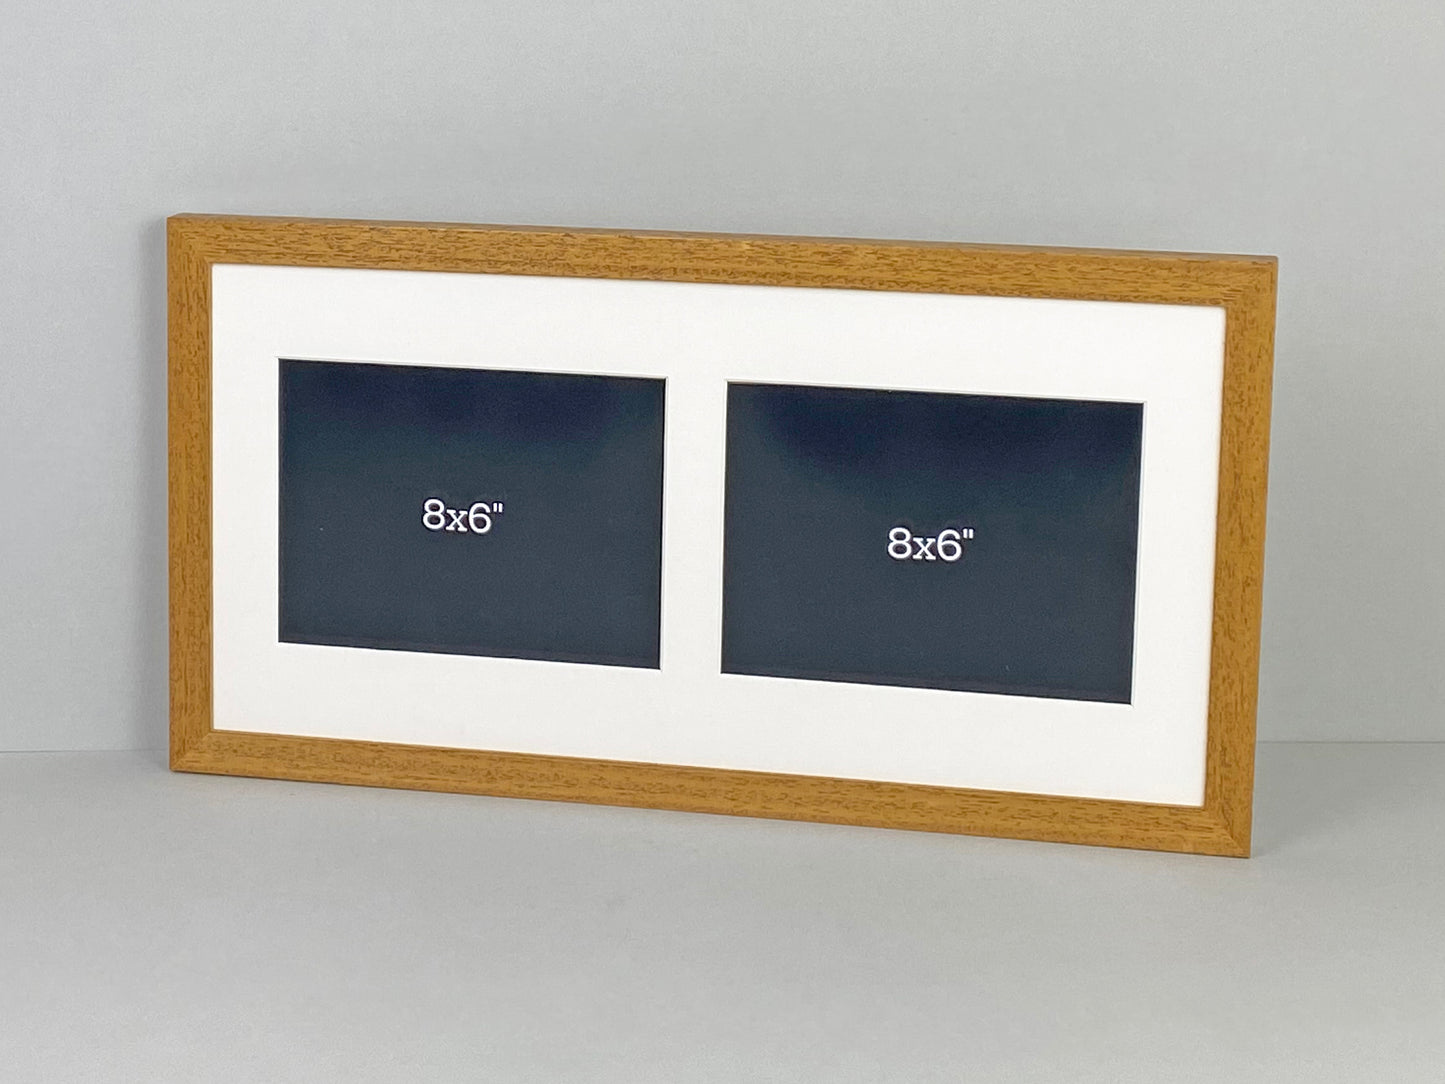 Suits Two 8x6" Photos. 25x50cm. Wooden Multi picture Frame - PhotoFramesandMore